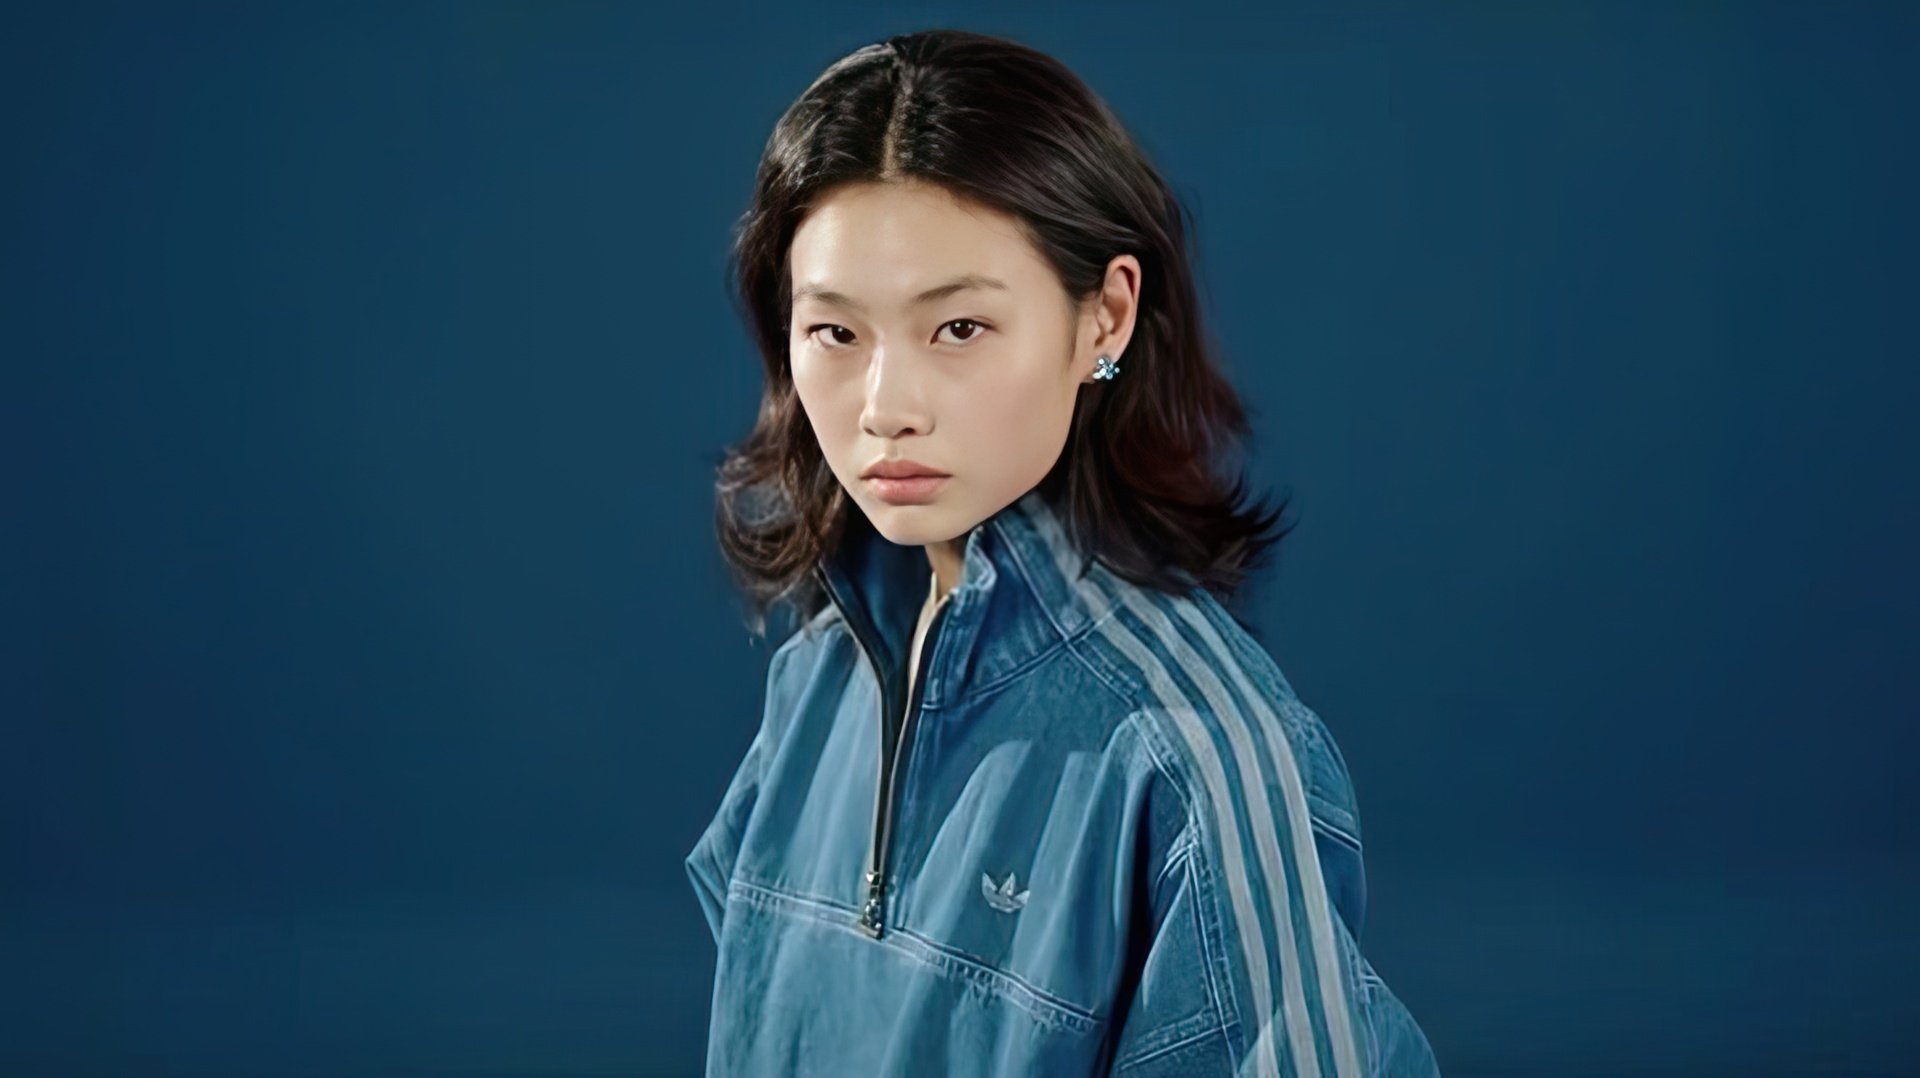 Jung Ho-Yeon became the face of Adidas